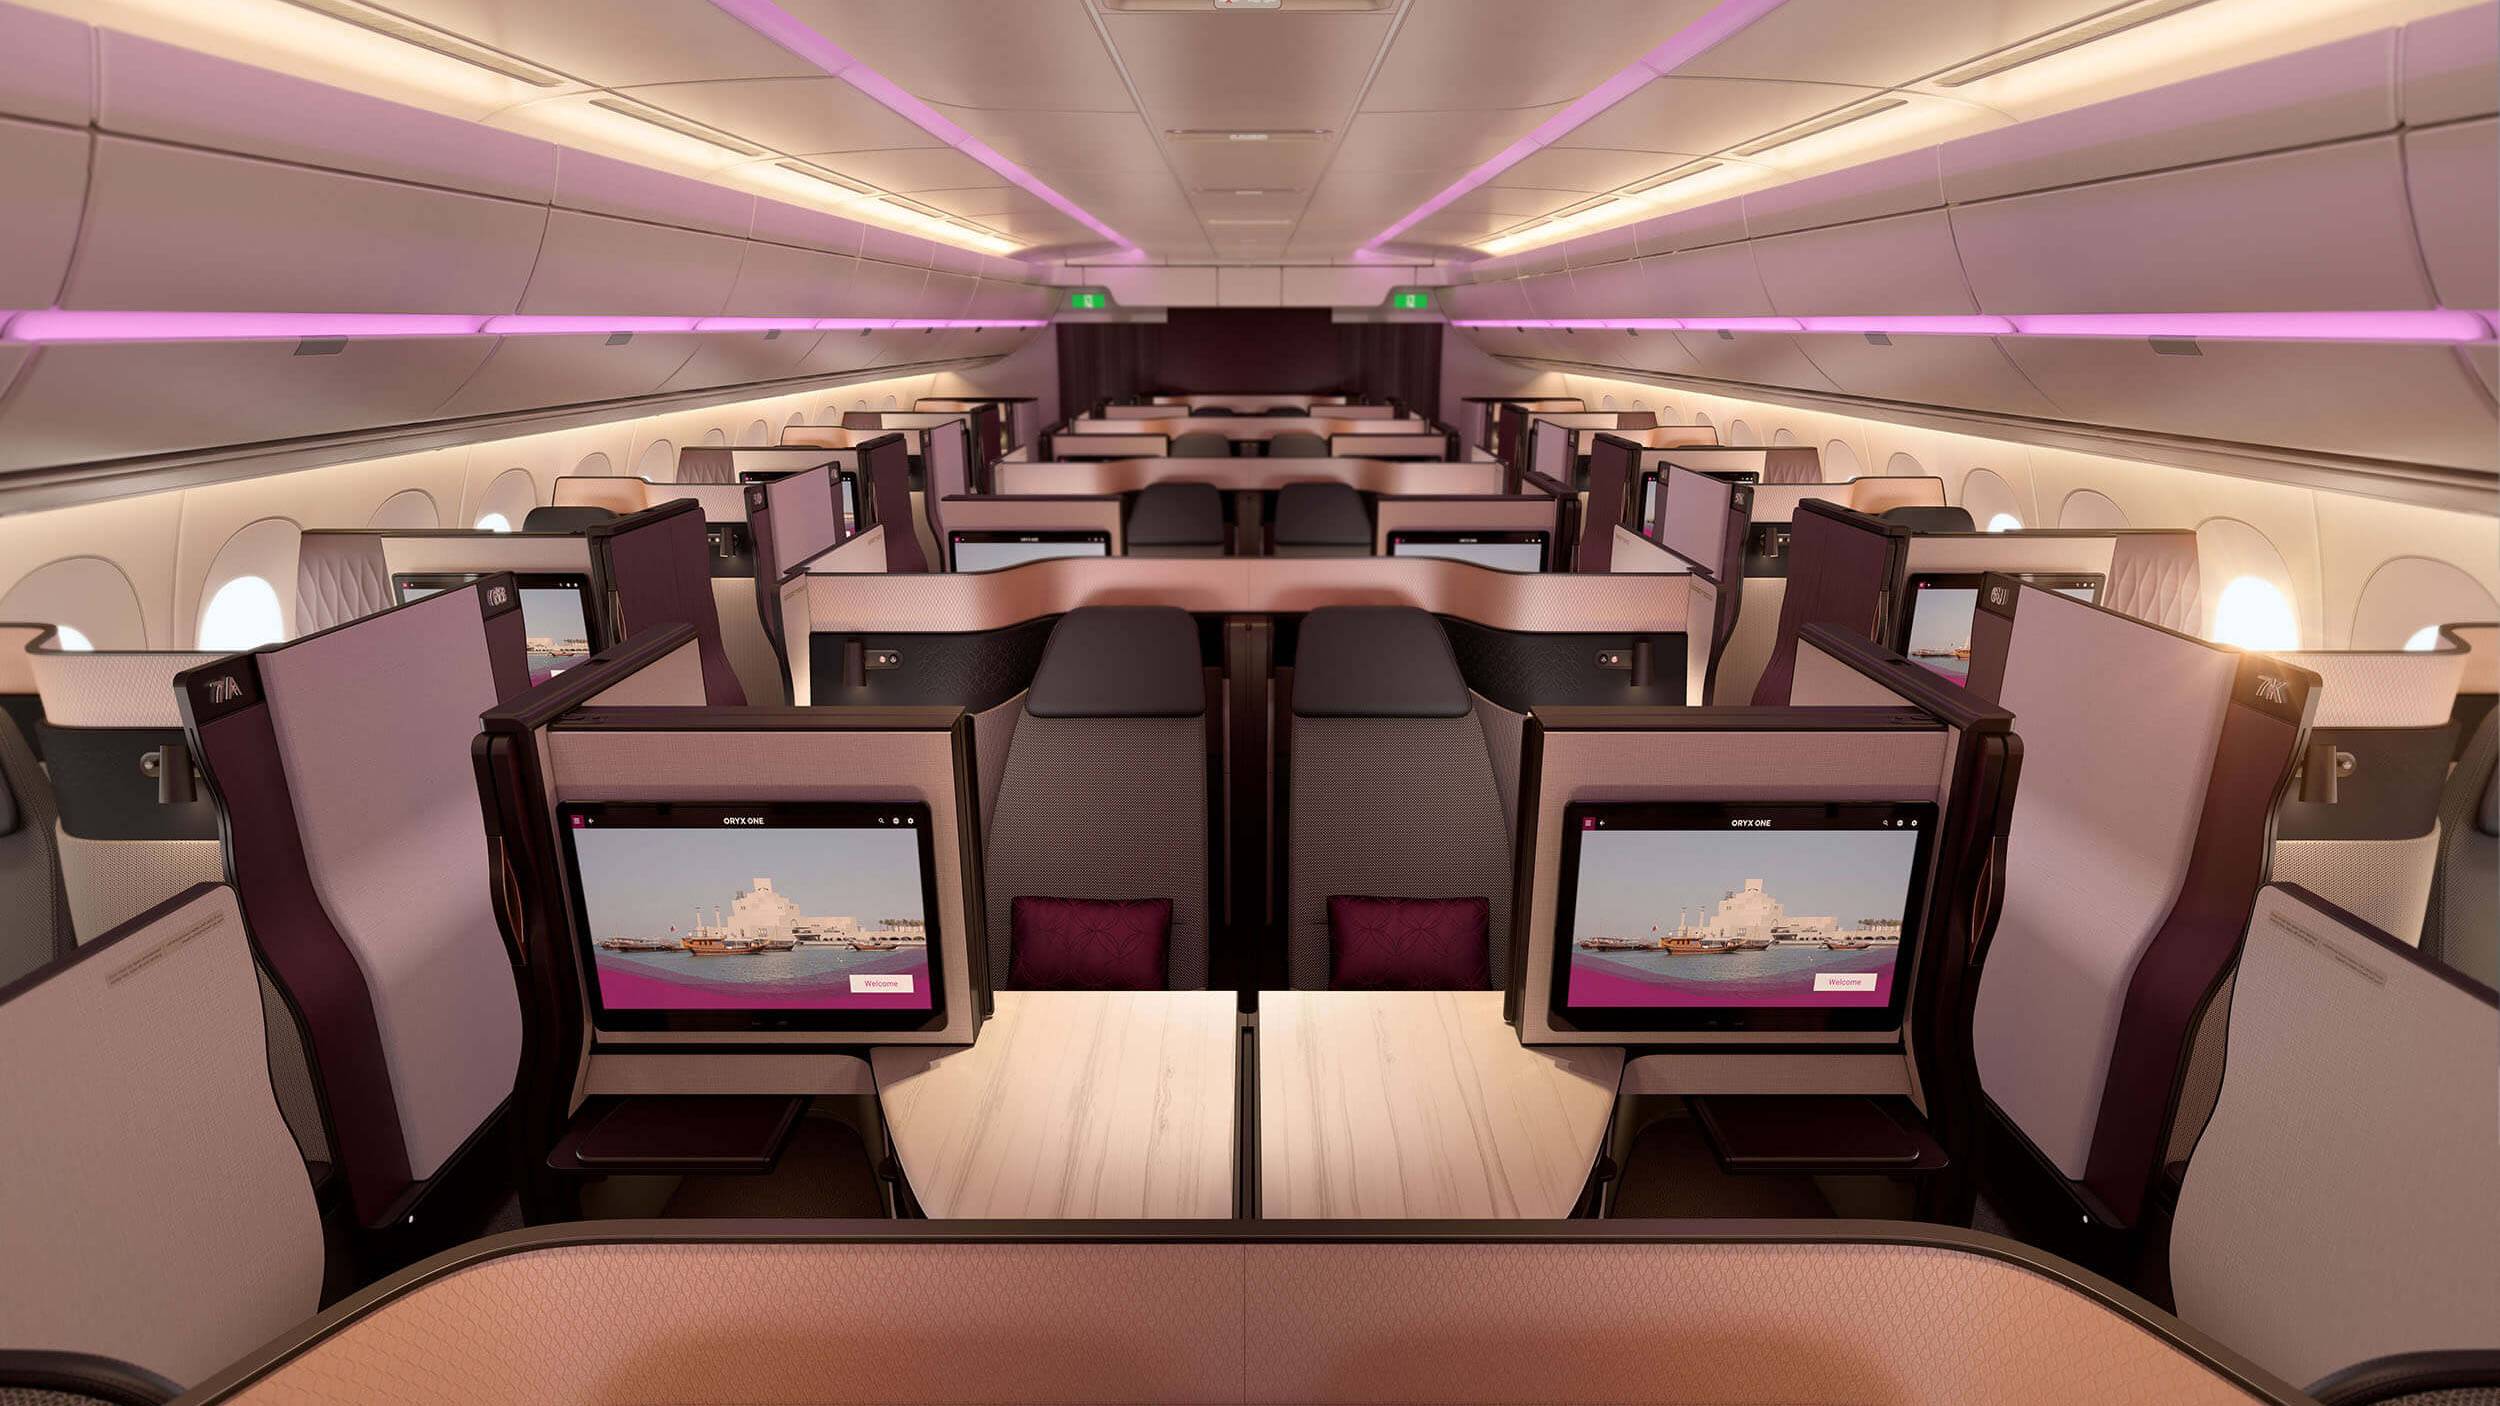 Full view of the QSuite Business Class cabin onboard Qatar Airways A350